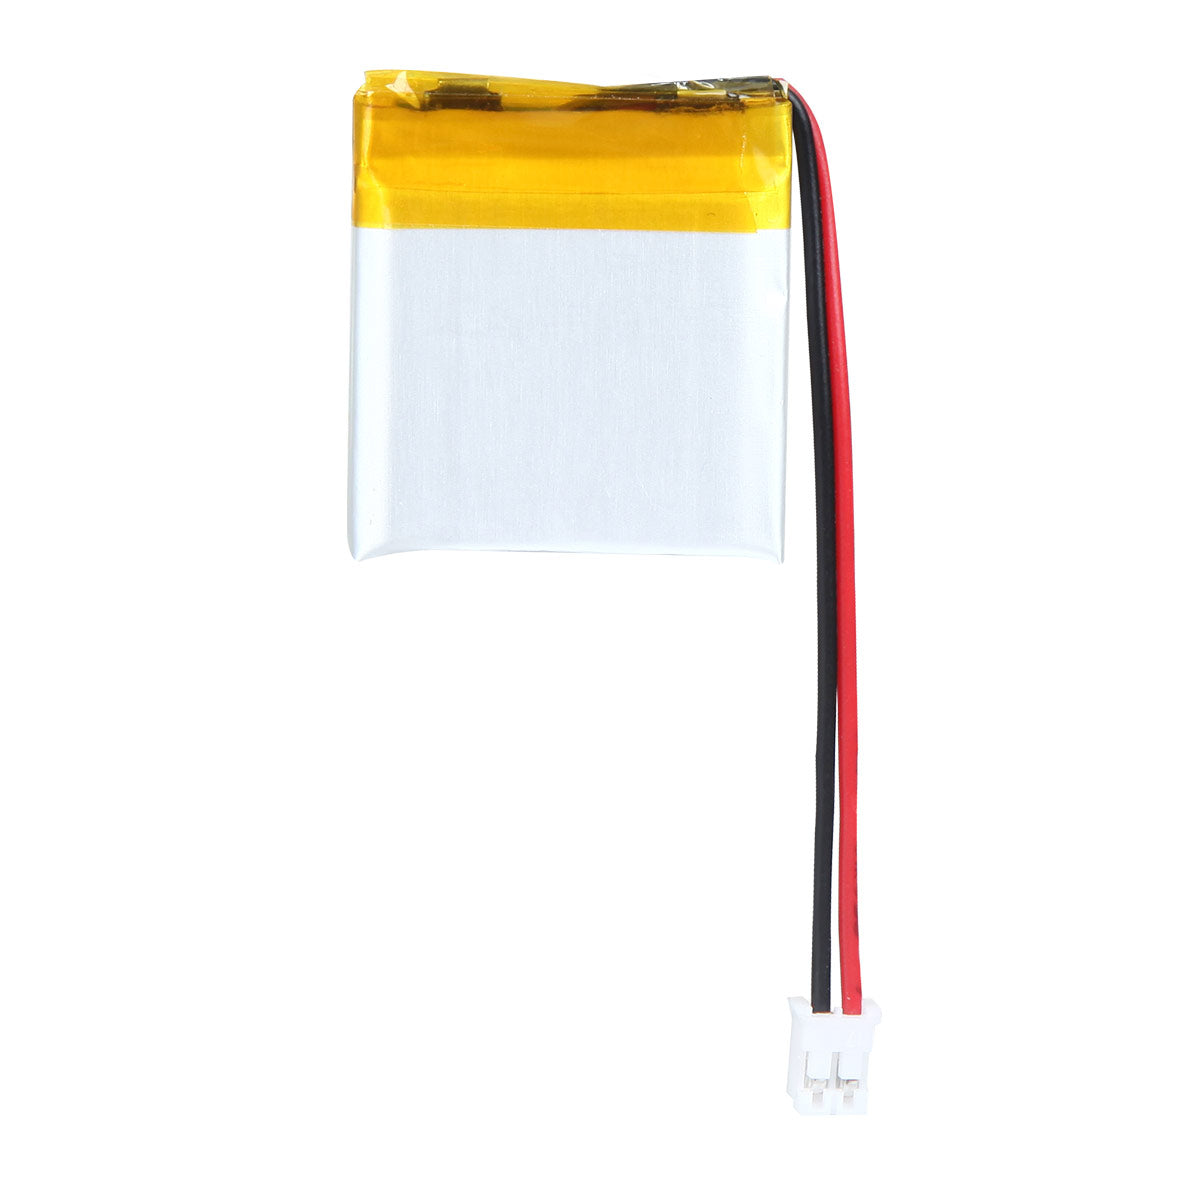 YDL 3.7V 430mAh 512728 Rechargeable Lipo Battery with JST Connector - YDL Battery